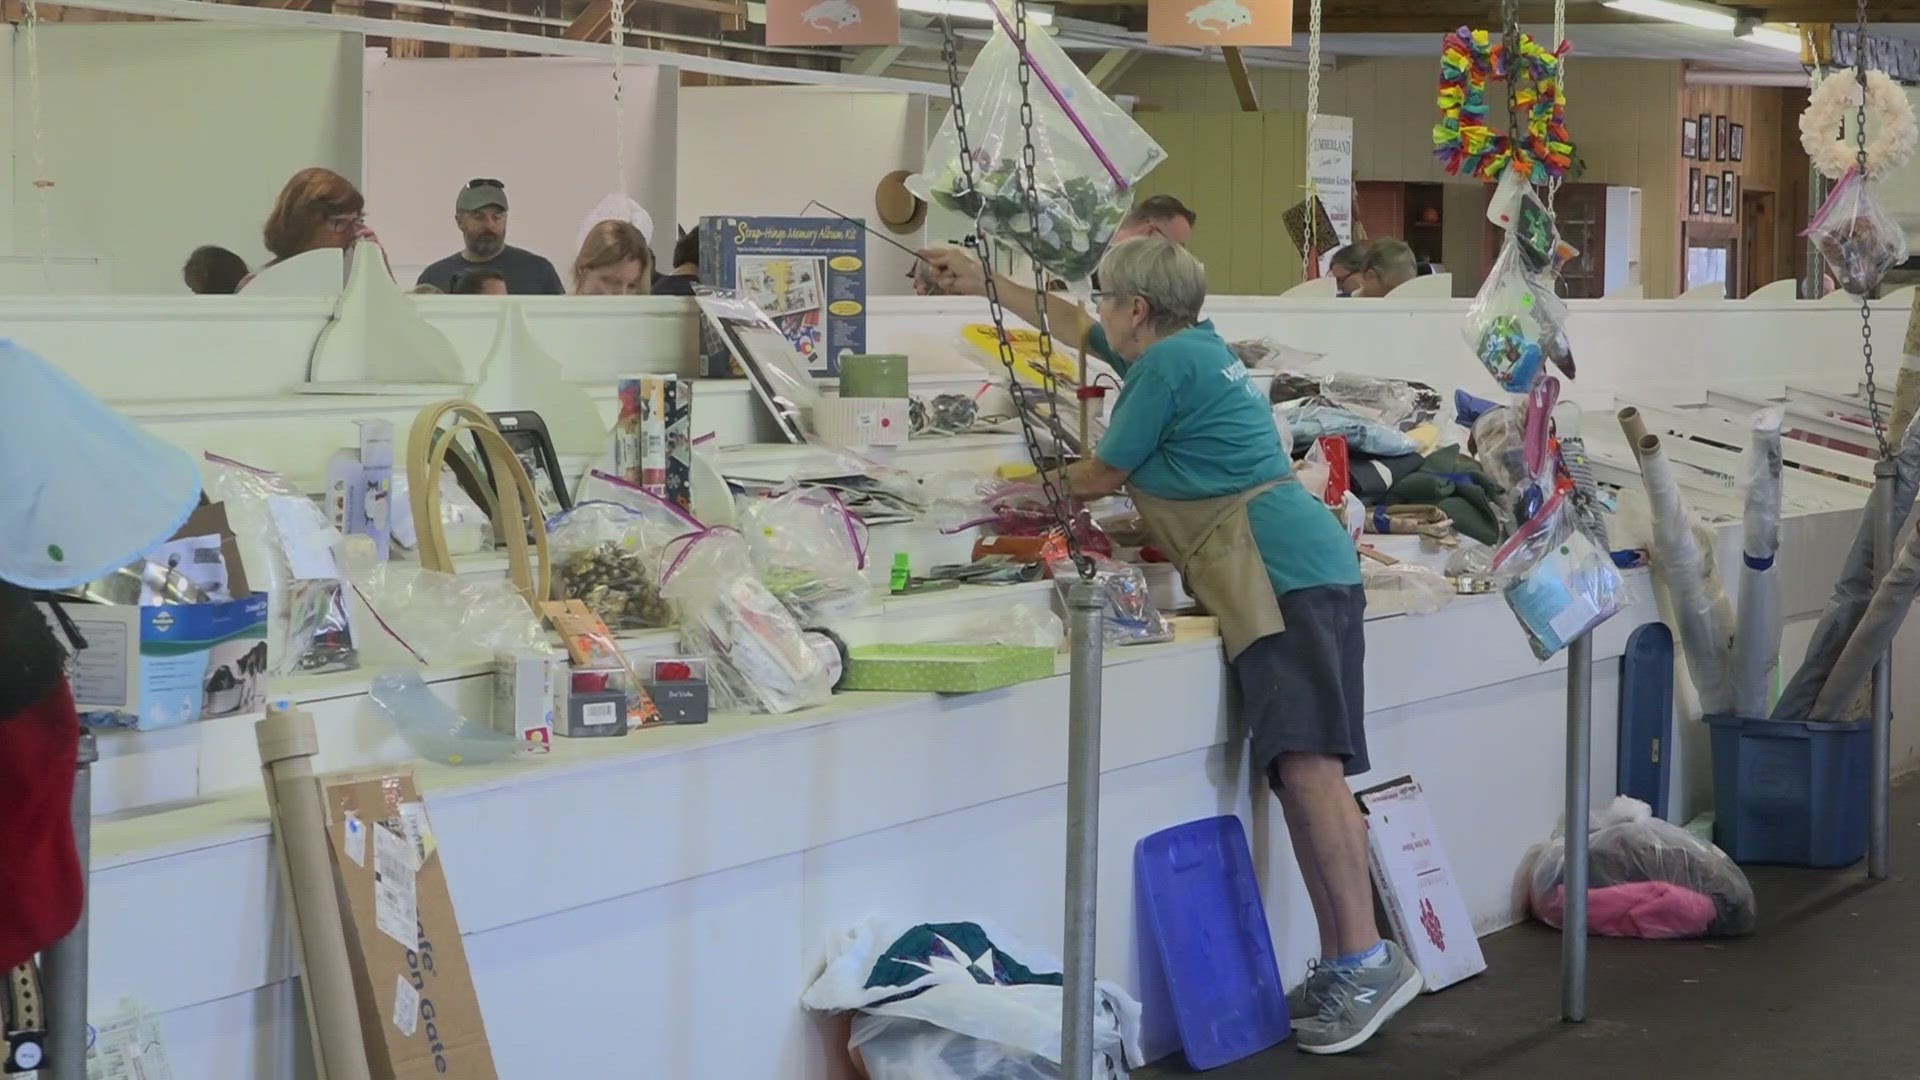 The annual yard sale wrapped up Sunday at the Cumberland Fair Grounds.